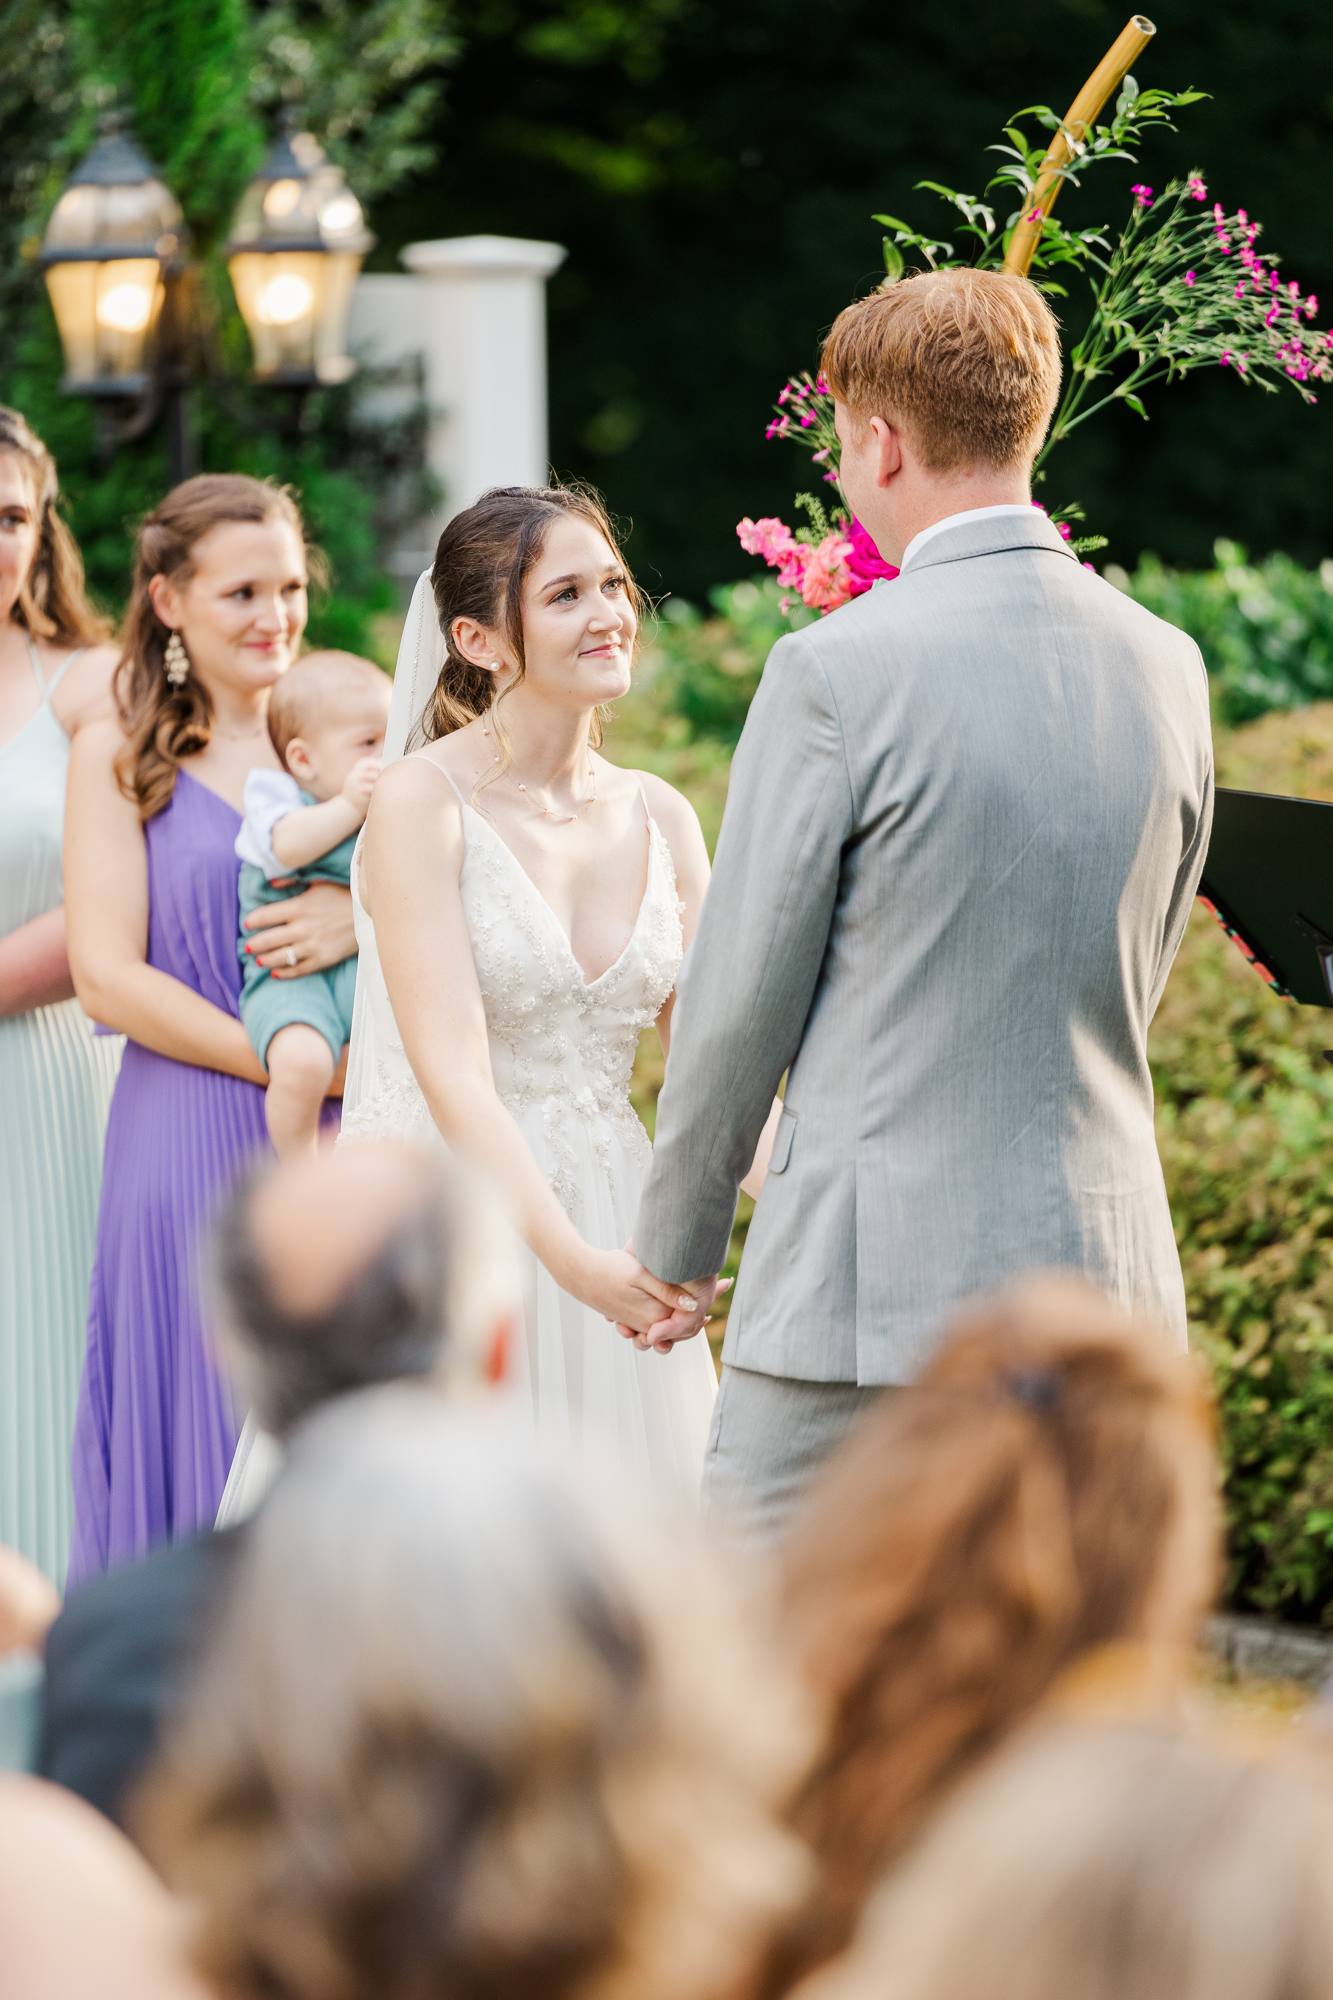 Whimsical Wedding at Briarcliff Manor in Summertime